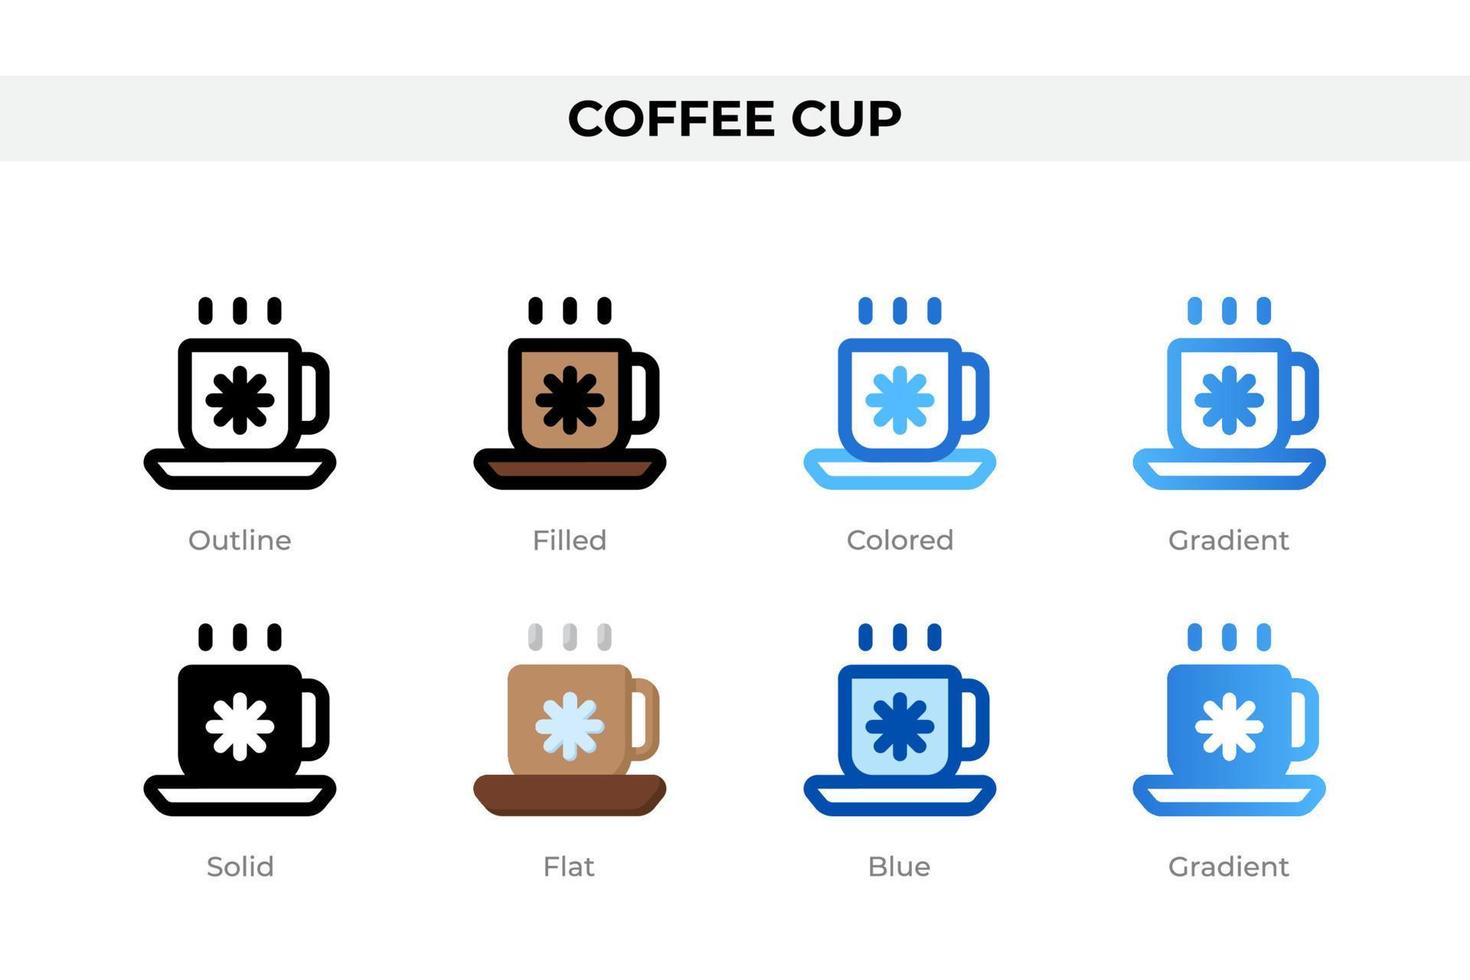 Coffee cup icons in different style. Coffee cup icons set. Holiday symbol. Different style icons set. Vector illustration